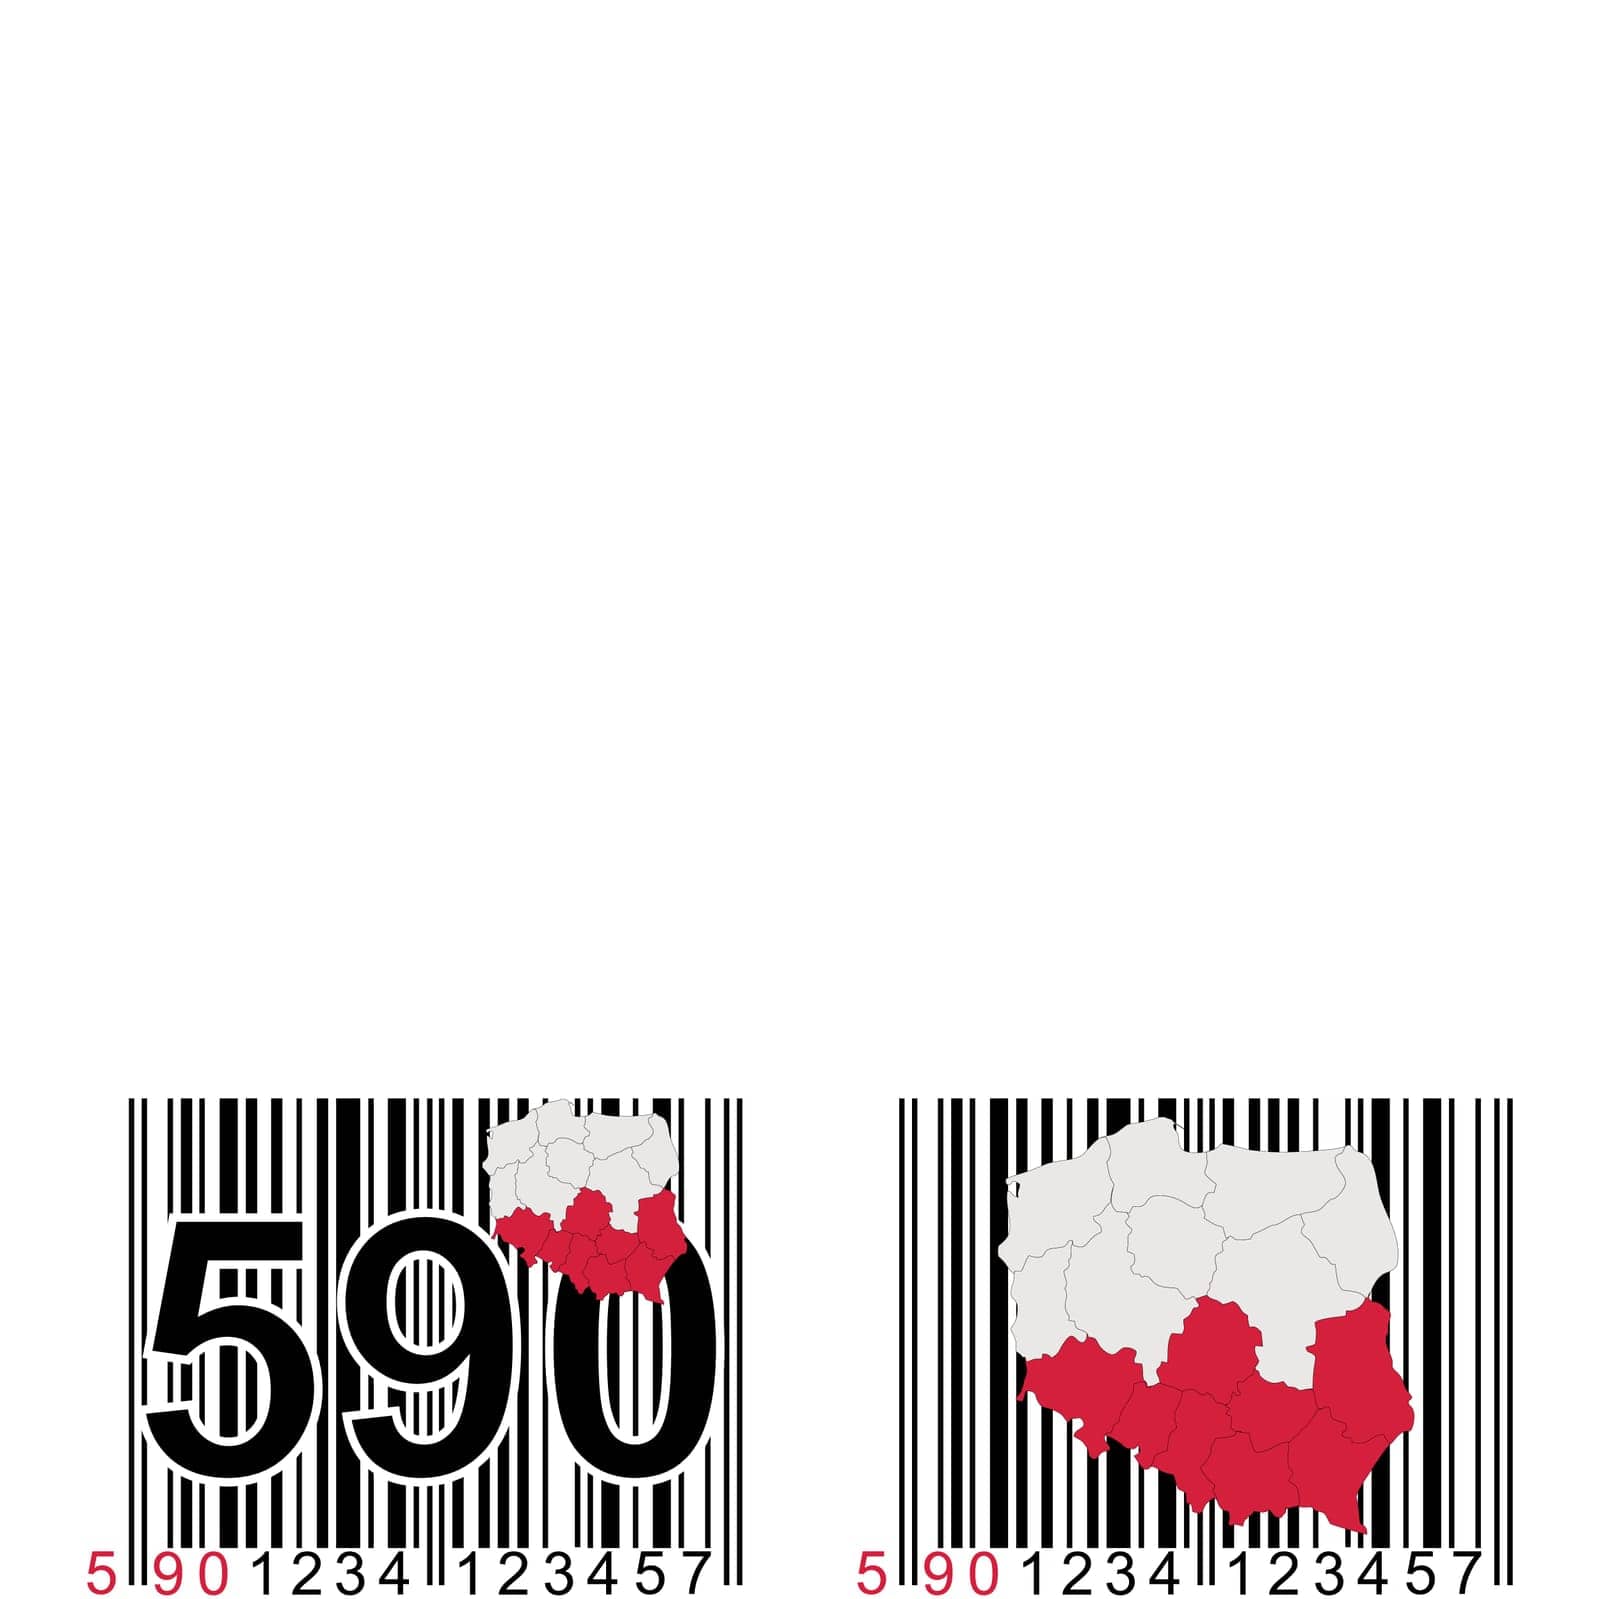 The bar code starting with 590 is a mark already produced in Poland - promote the purchase of Polish goods. by fotodrobik